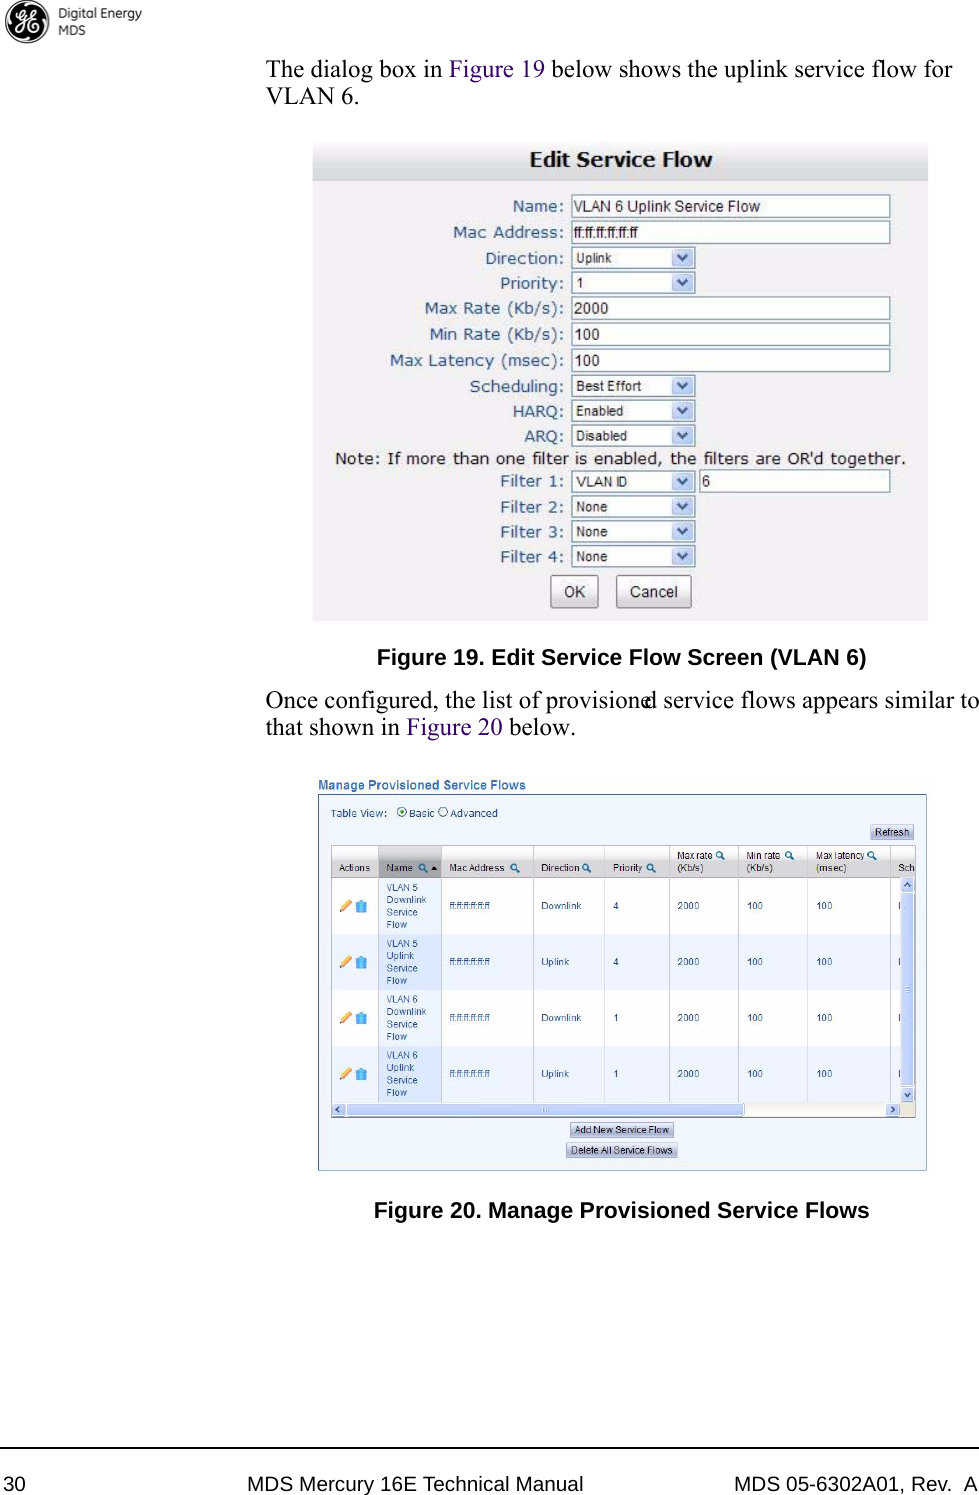 30 MDS Mercury 16E Technical Manual MDS 05-6302A01, Rev.  AThe dialog box in Figure 19 below shows the uplink service flow for VLAN 6.Figure 19. Edit Service Flow Screen (VLAN 6)Once configured, the list of provisioned service flows appears similar to that shown in Figure 20 below.Figure 20. Manage Provisioned Service Flows